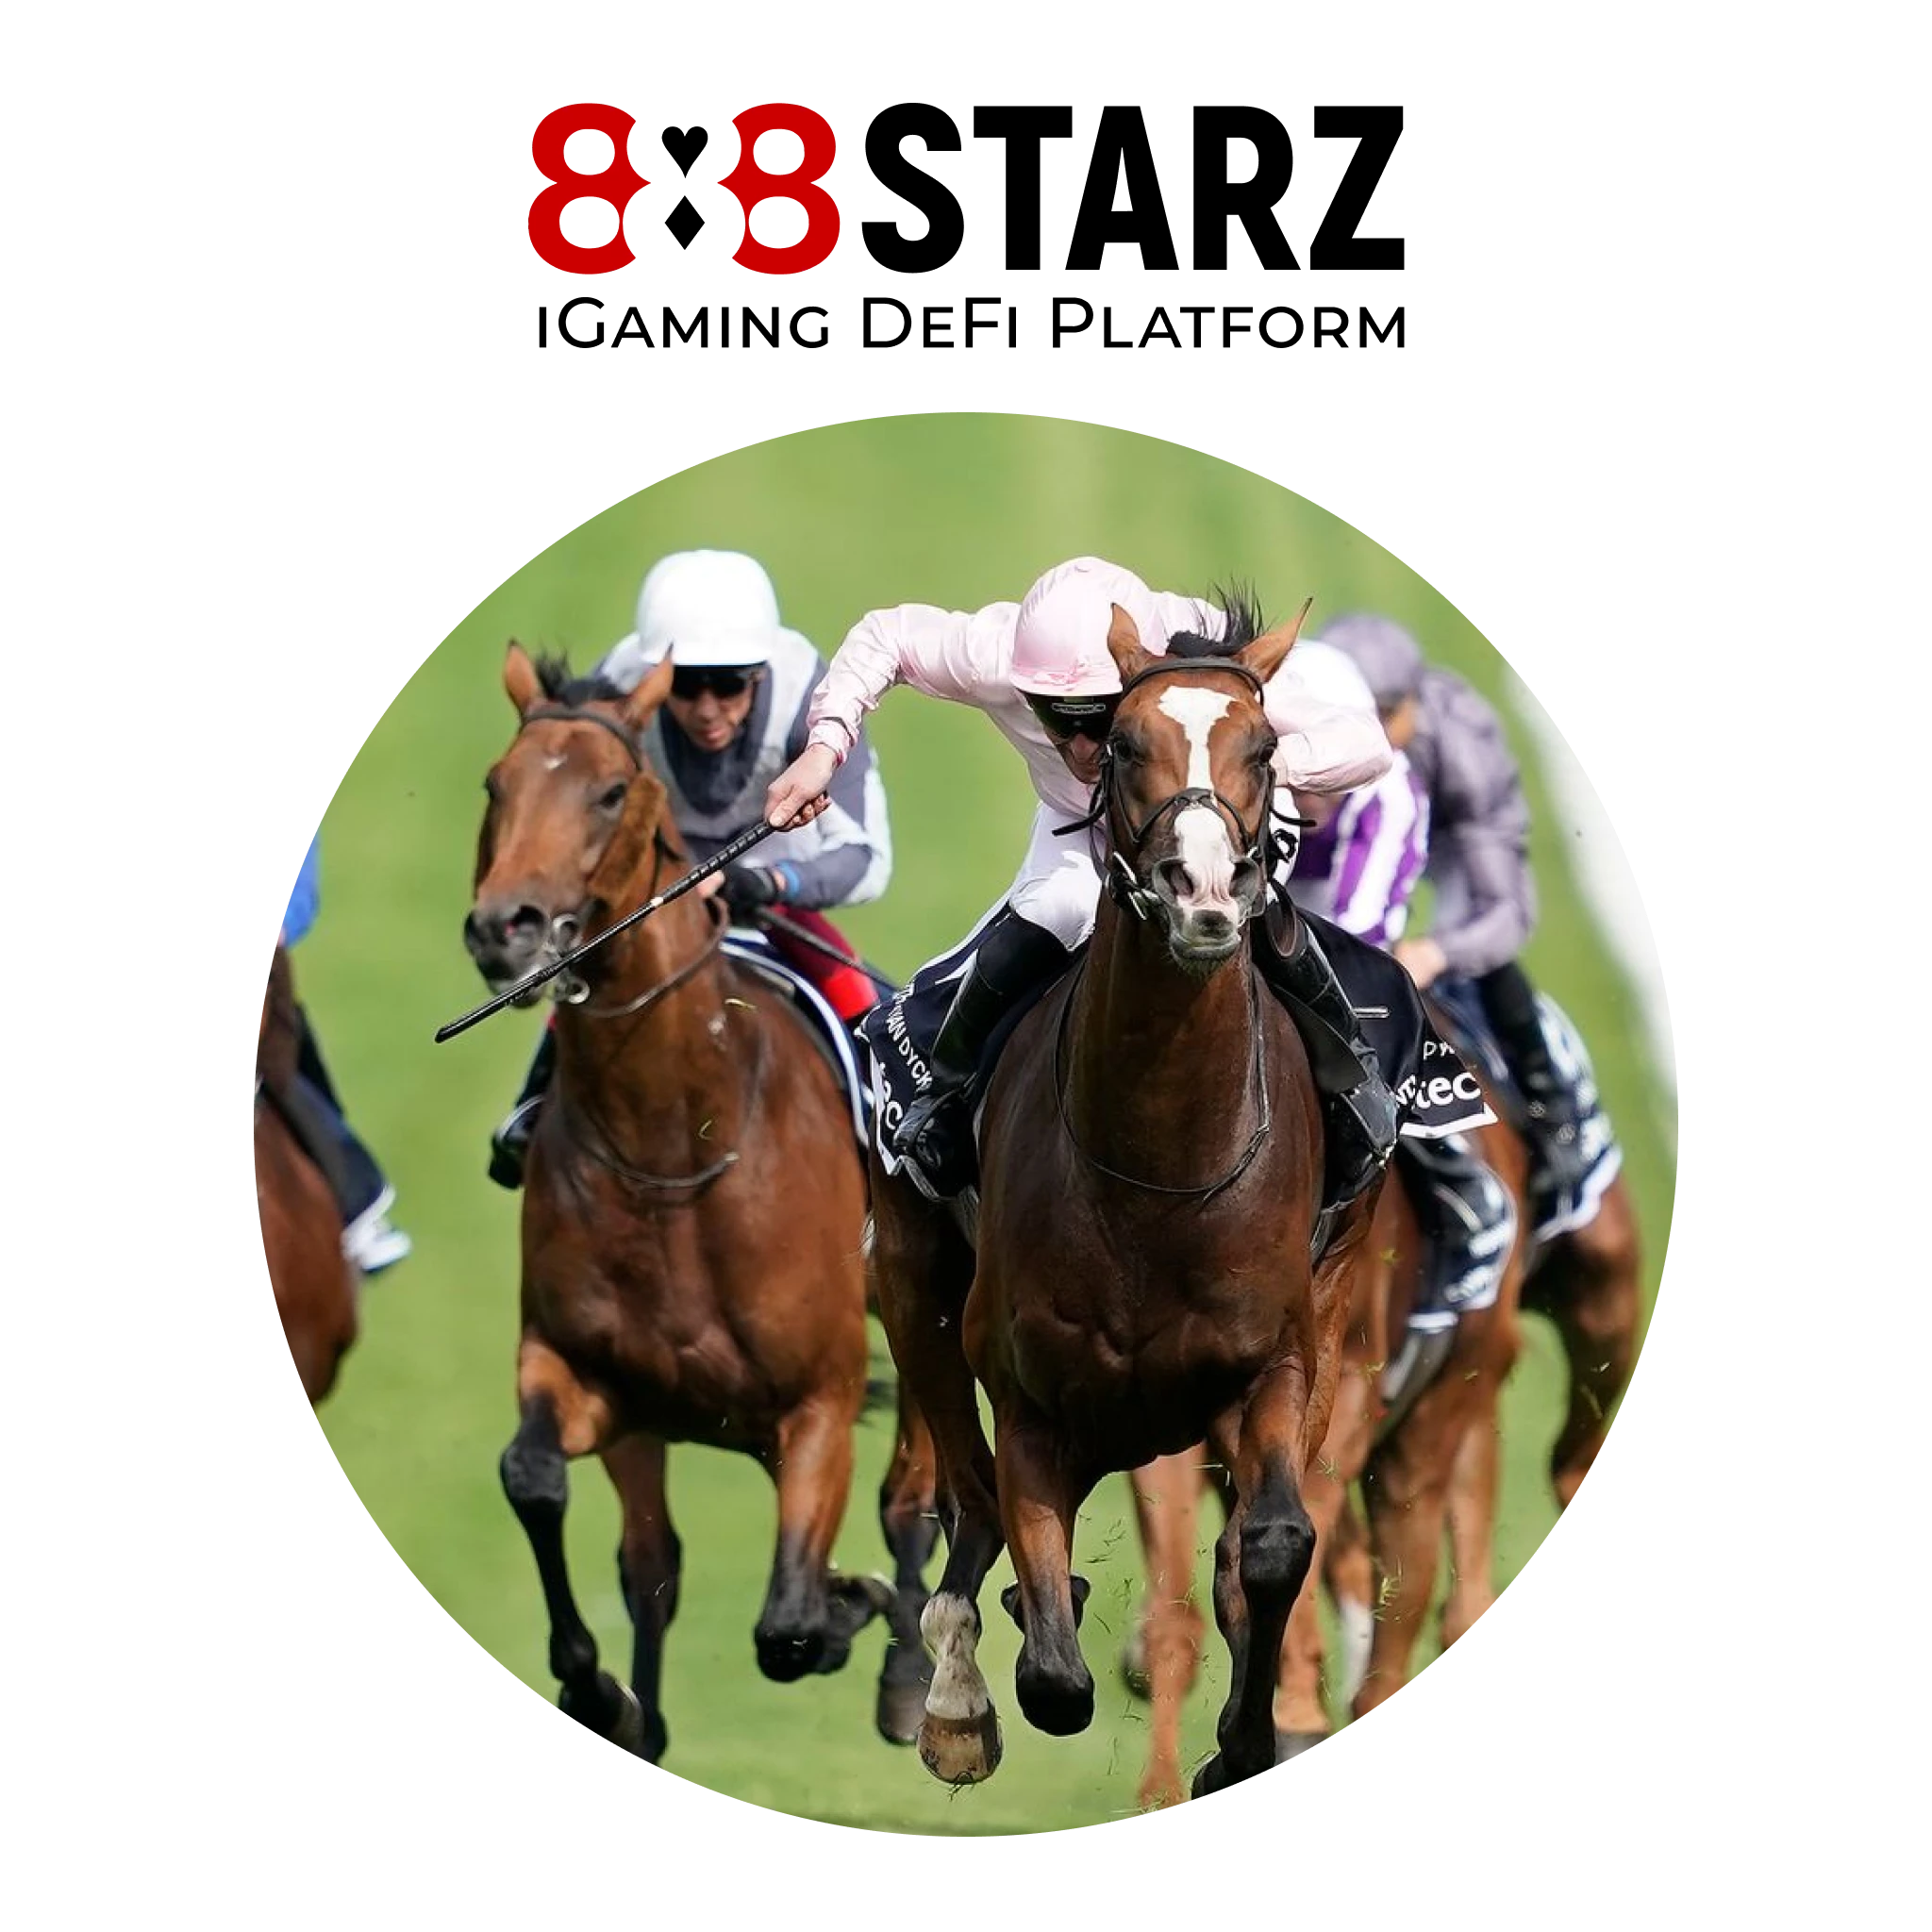 Start online horse racing betting with 888starz!